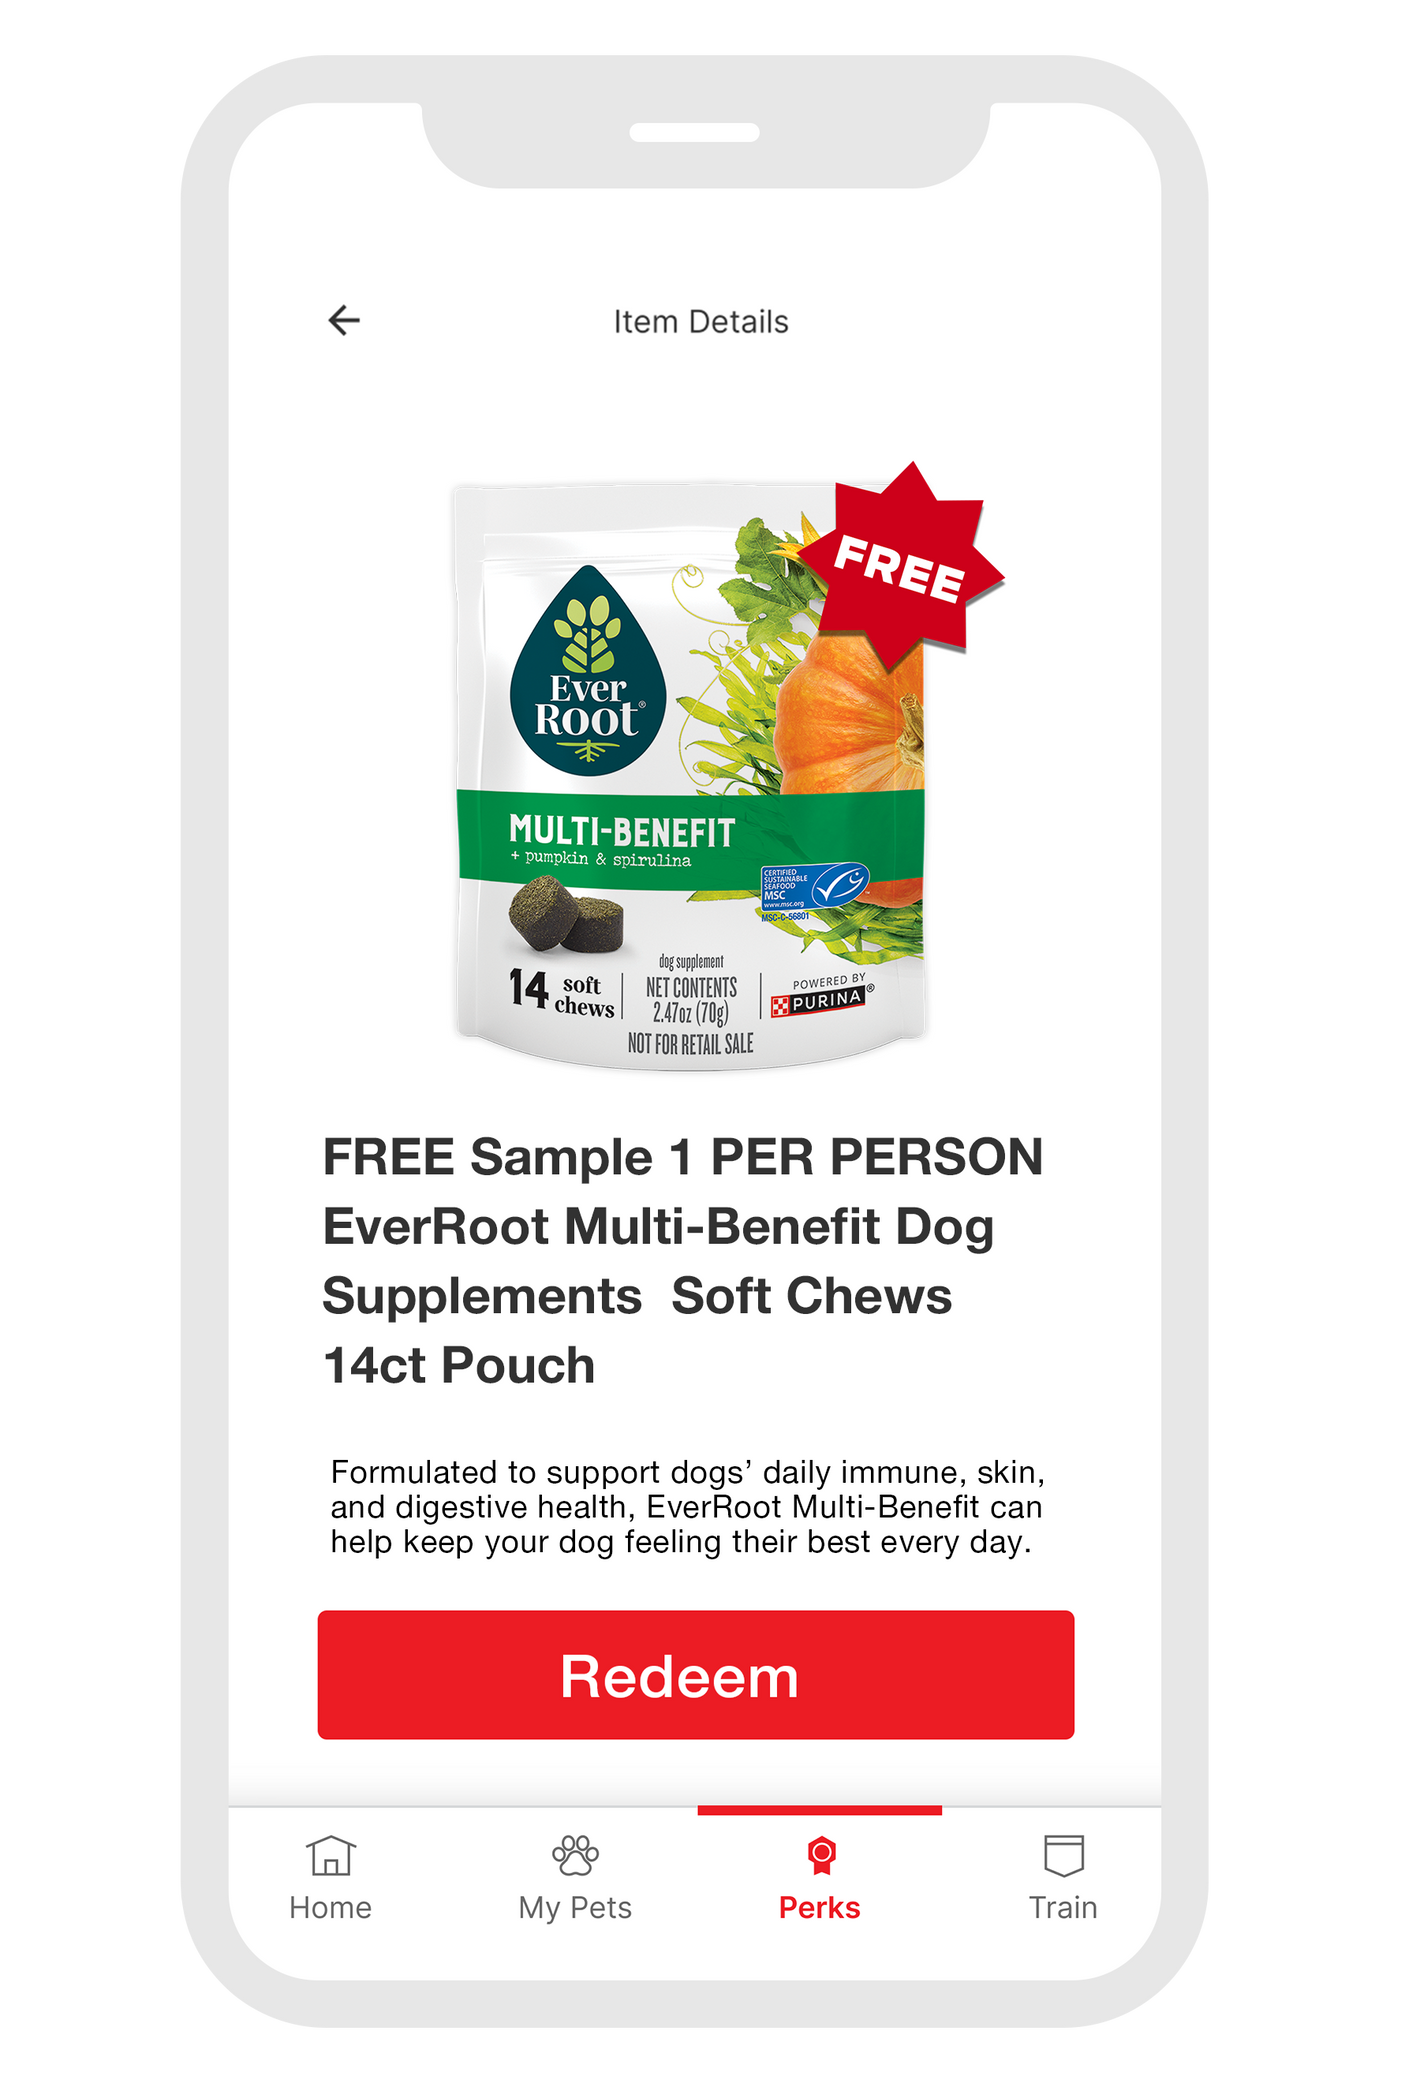 Step 3 - Select EverRoot Free Sample and redeem